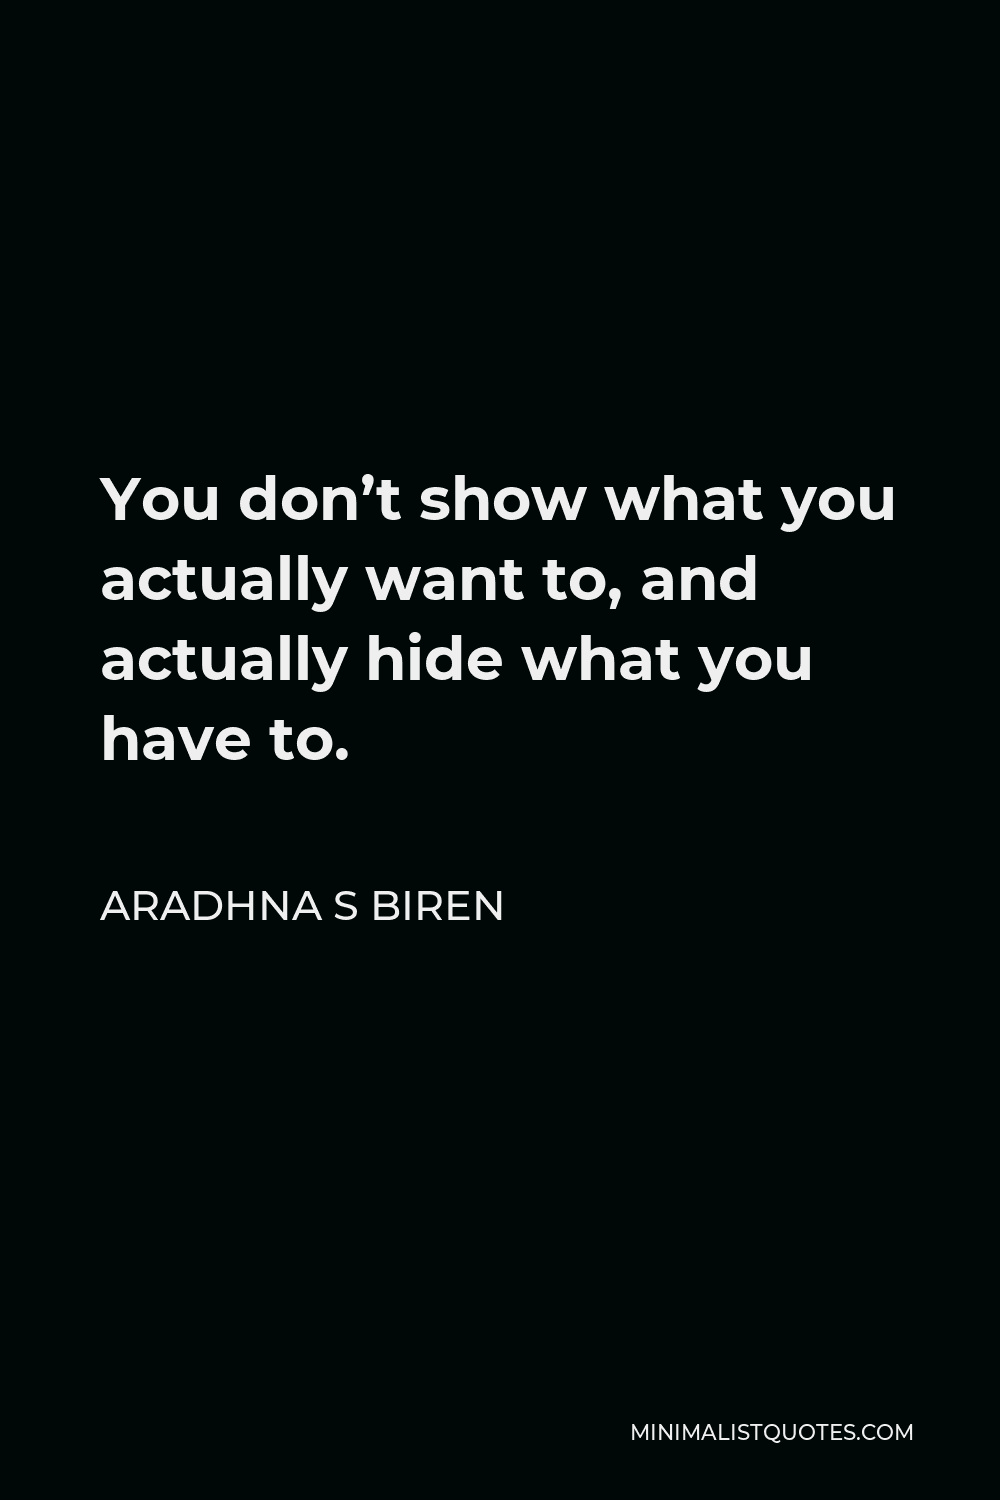 Aradhna S Biren Quote - You don’t show what you actually want to, and actually hide what you have to.